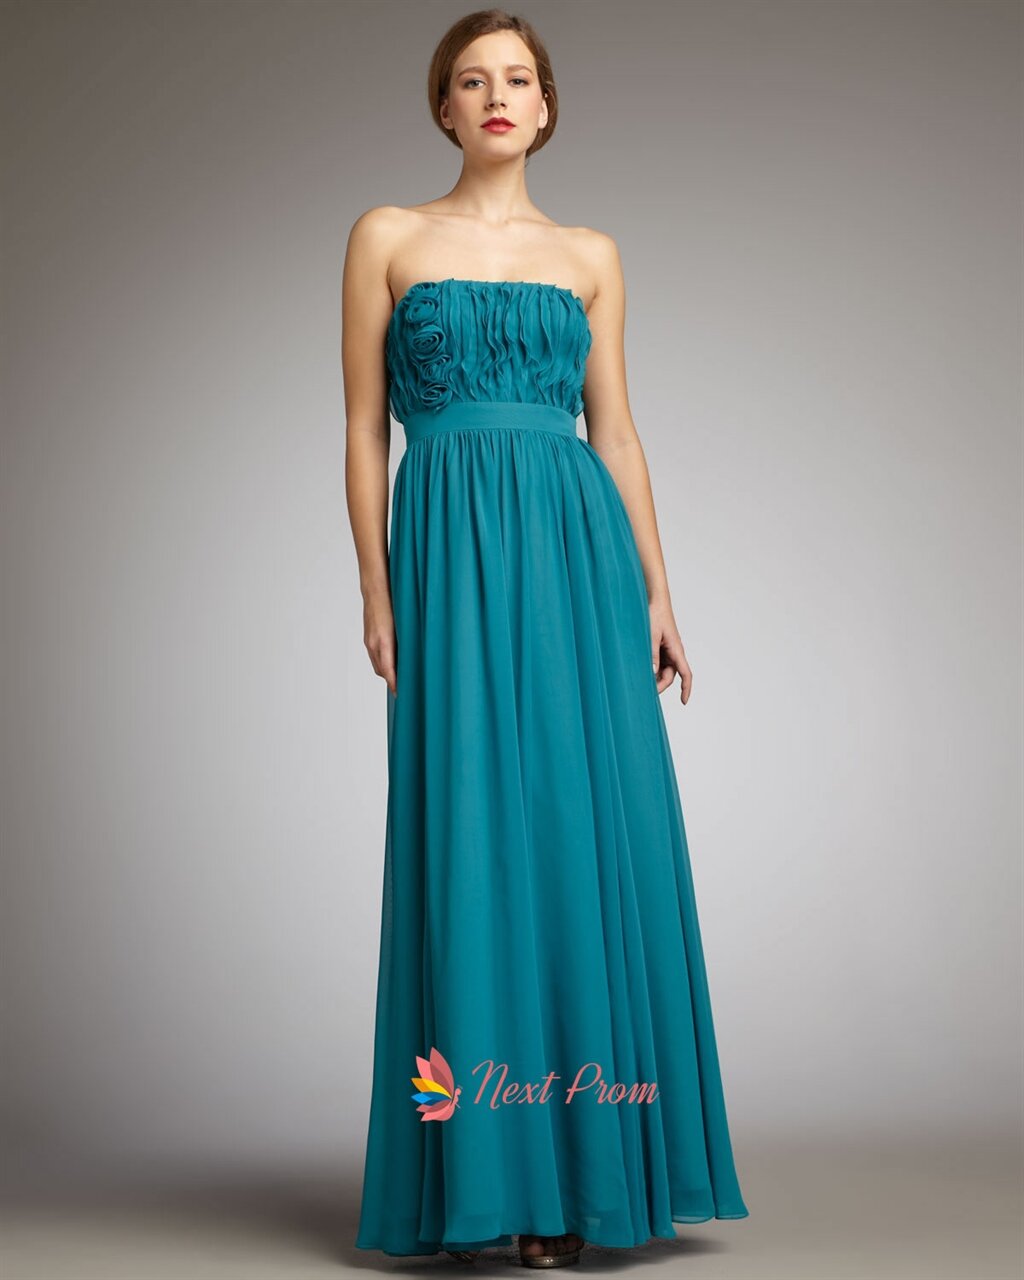 Teal dresses for wedding Photo - 7